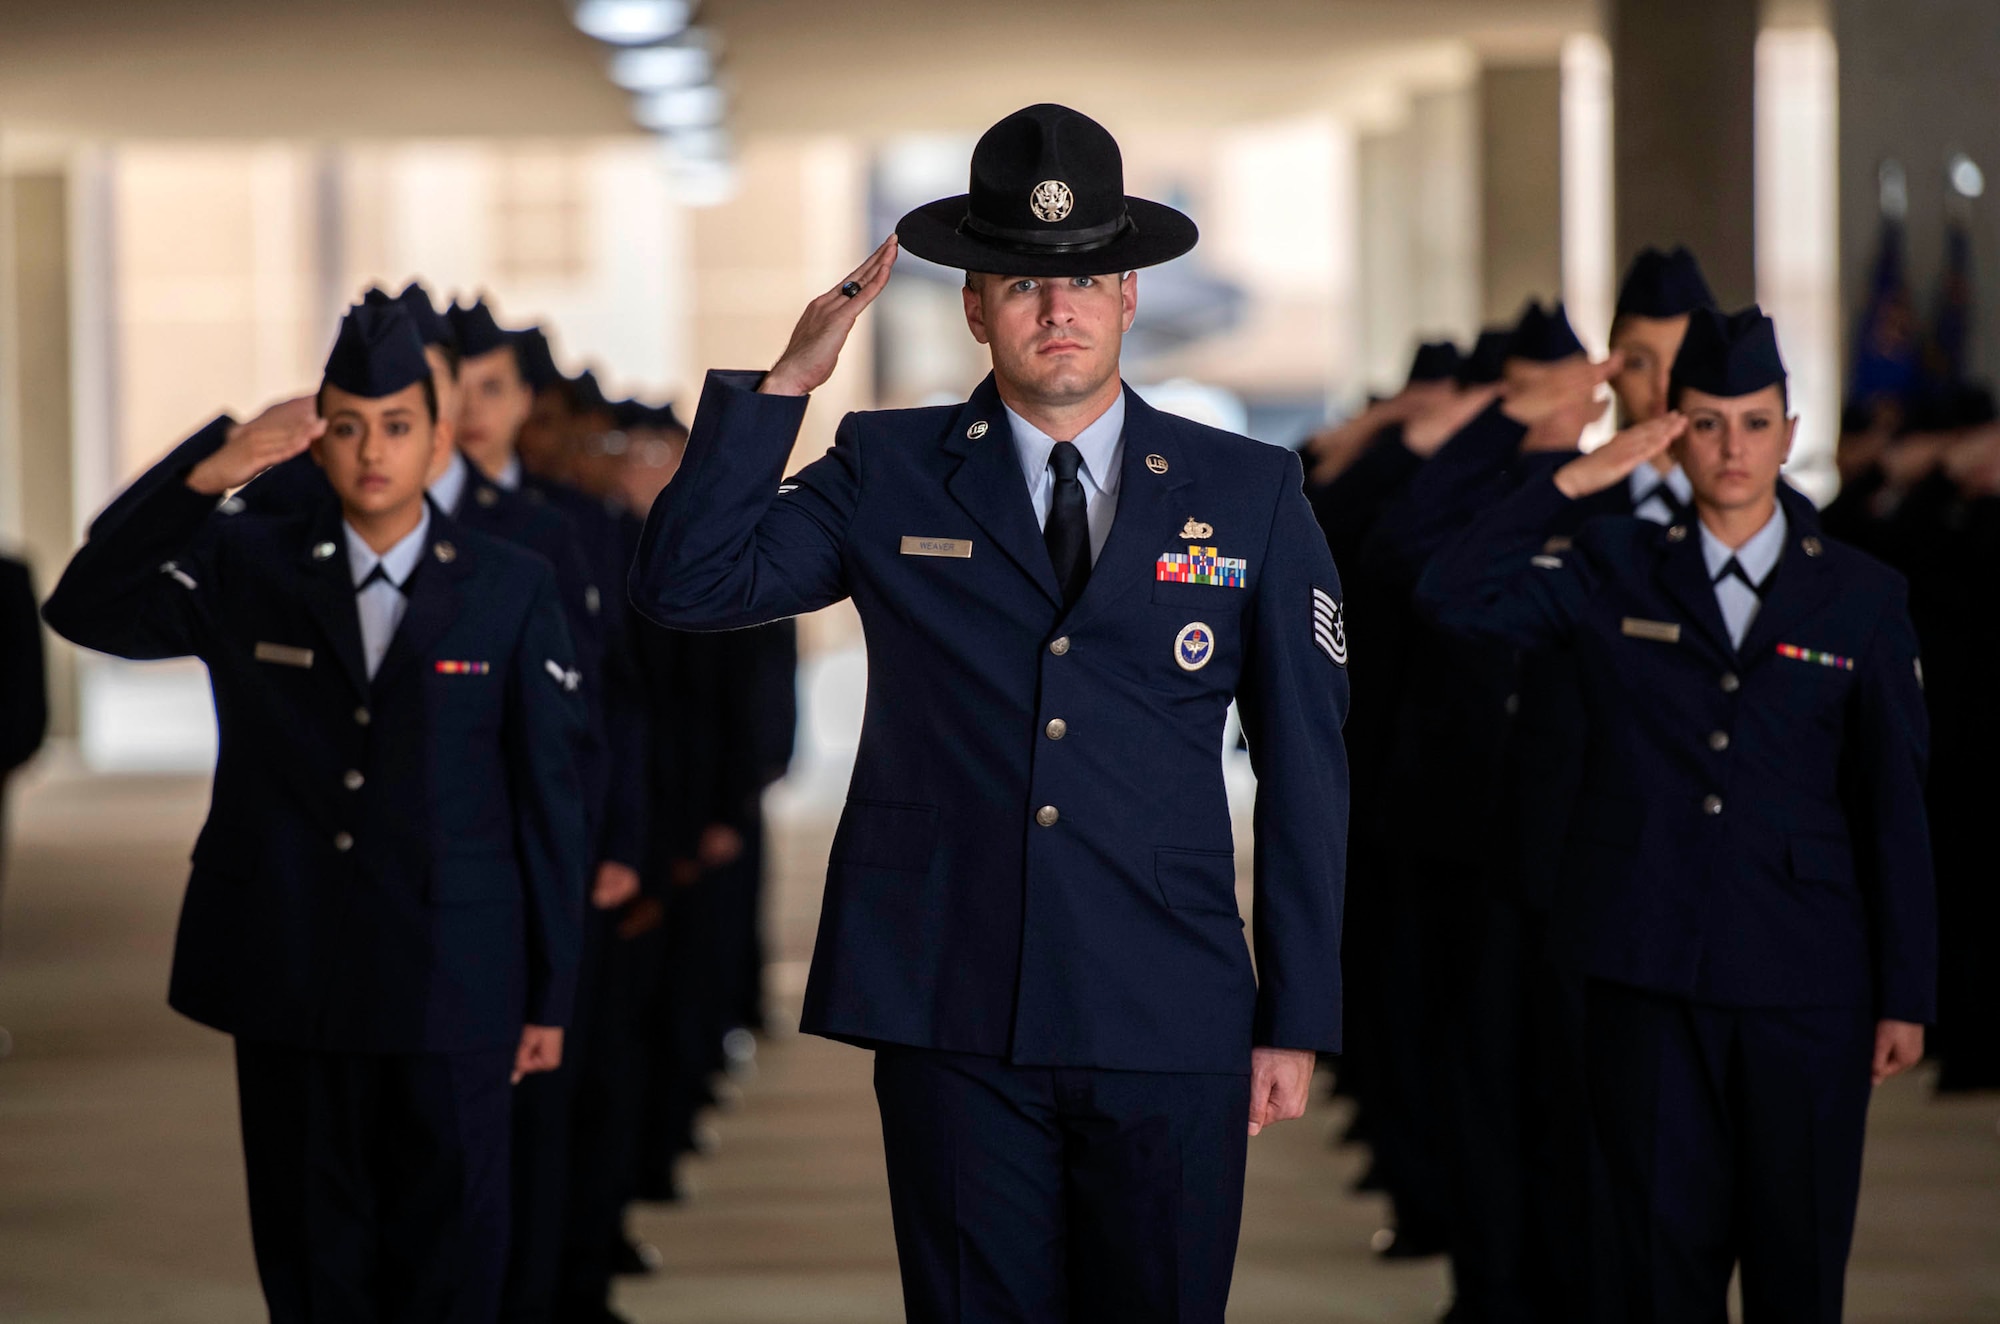 U.S. Air Force Tech. Sgt. Donald Weaver, 320th Training Squadron military training instructor, leads his flight with a salute during an Air Force BMT graduation Mar. 19, 2020, held at the 320th Training Squadron’s Airman Training Complex on Joint Base San Antonio-Lackland, Texas. Due to current world events, the 37th Training Wing has implemented social distancing by graduating 668 Airmen during four different ceremonies at different Airman Training Complexes. The graduation ceremonies will be closed to the public until further notice for the safety and security of the newly accessioned Airmen and their family members due to coronavirus (COVID-19).